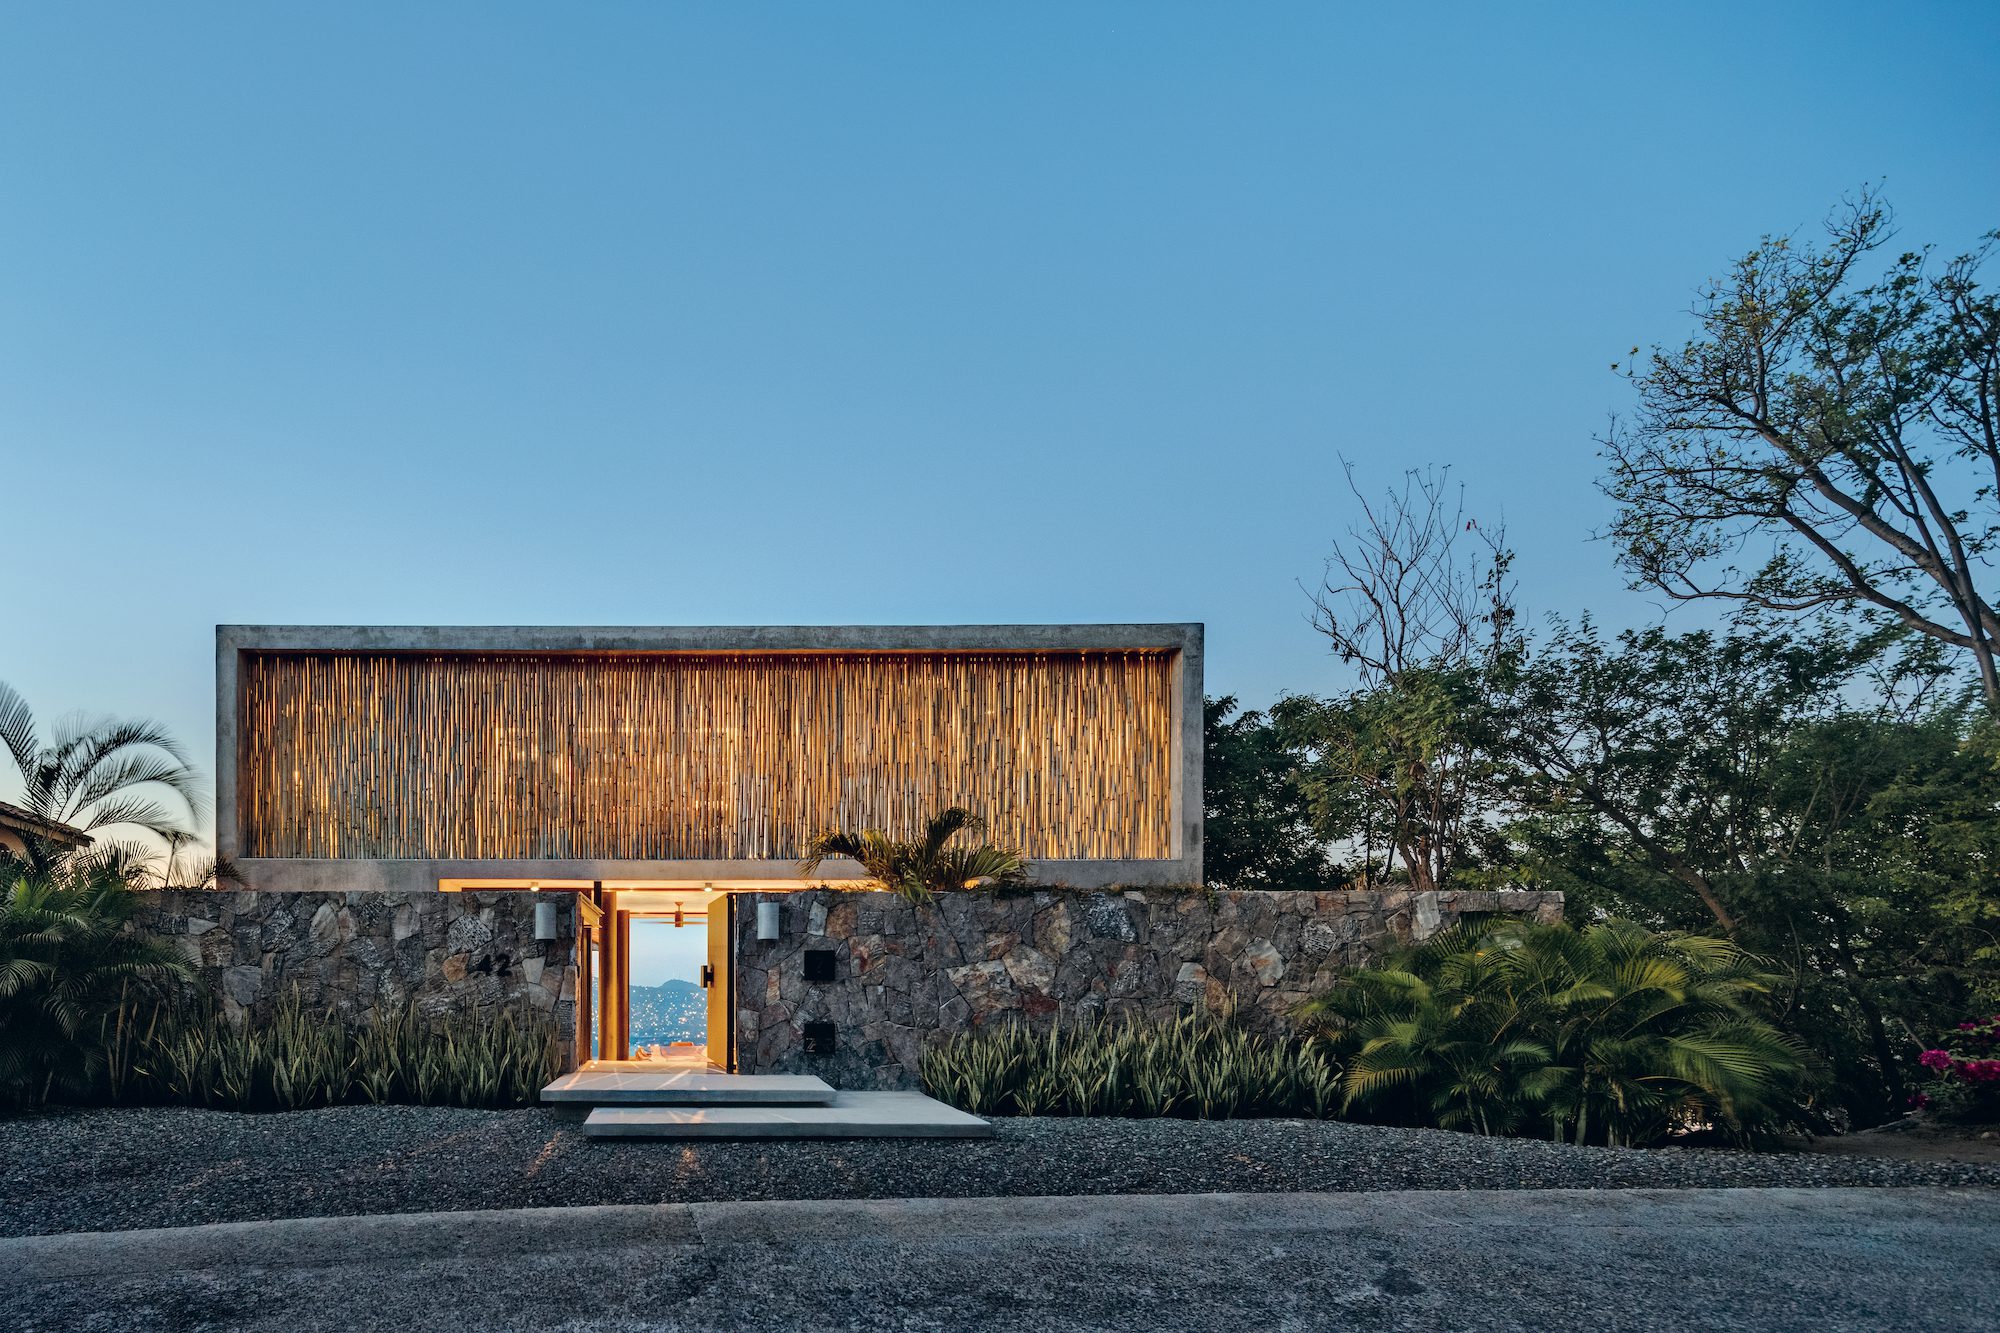 <em>Casa Z by Zozaya Arquitectos (Photography: Rafael Gamo), extract from ‘Beautiful Beach Houses’, published by The Images Publishing Group</em>